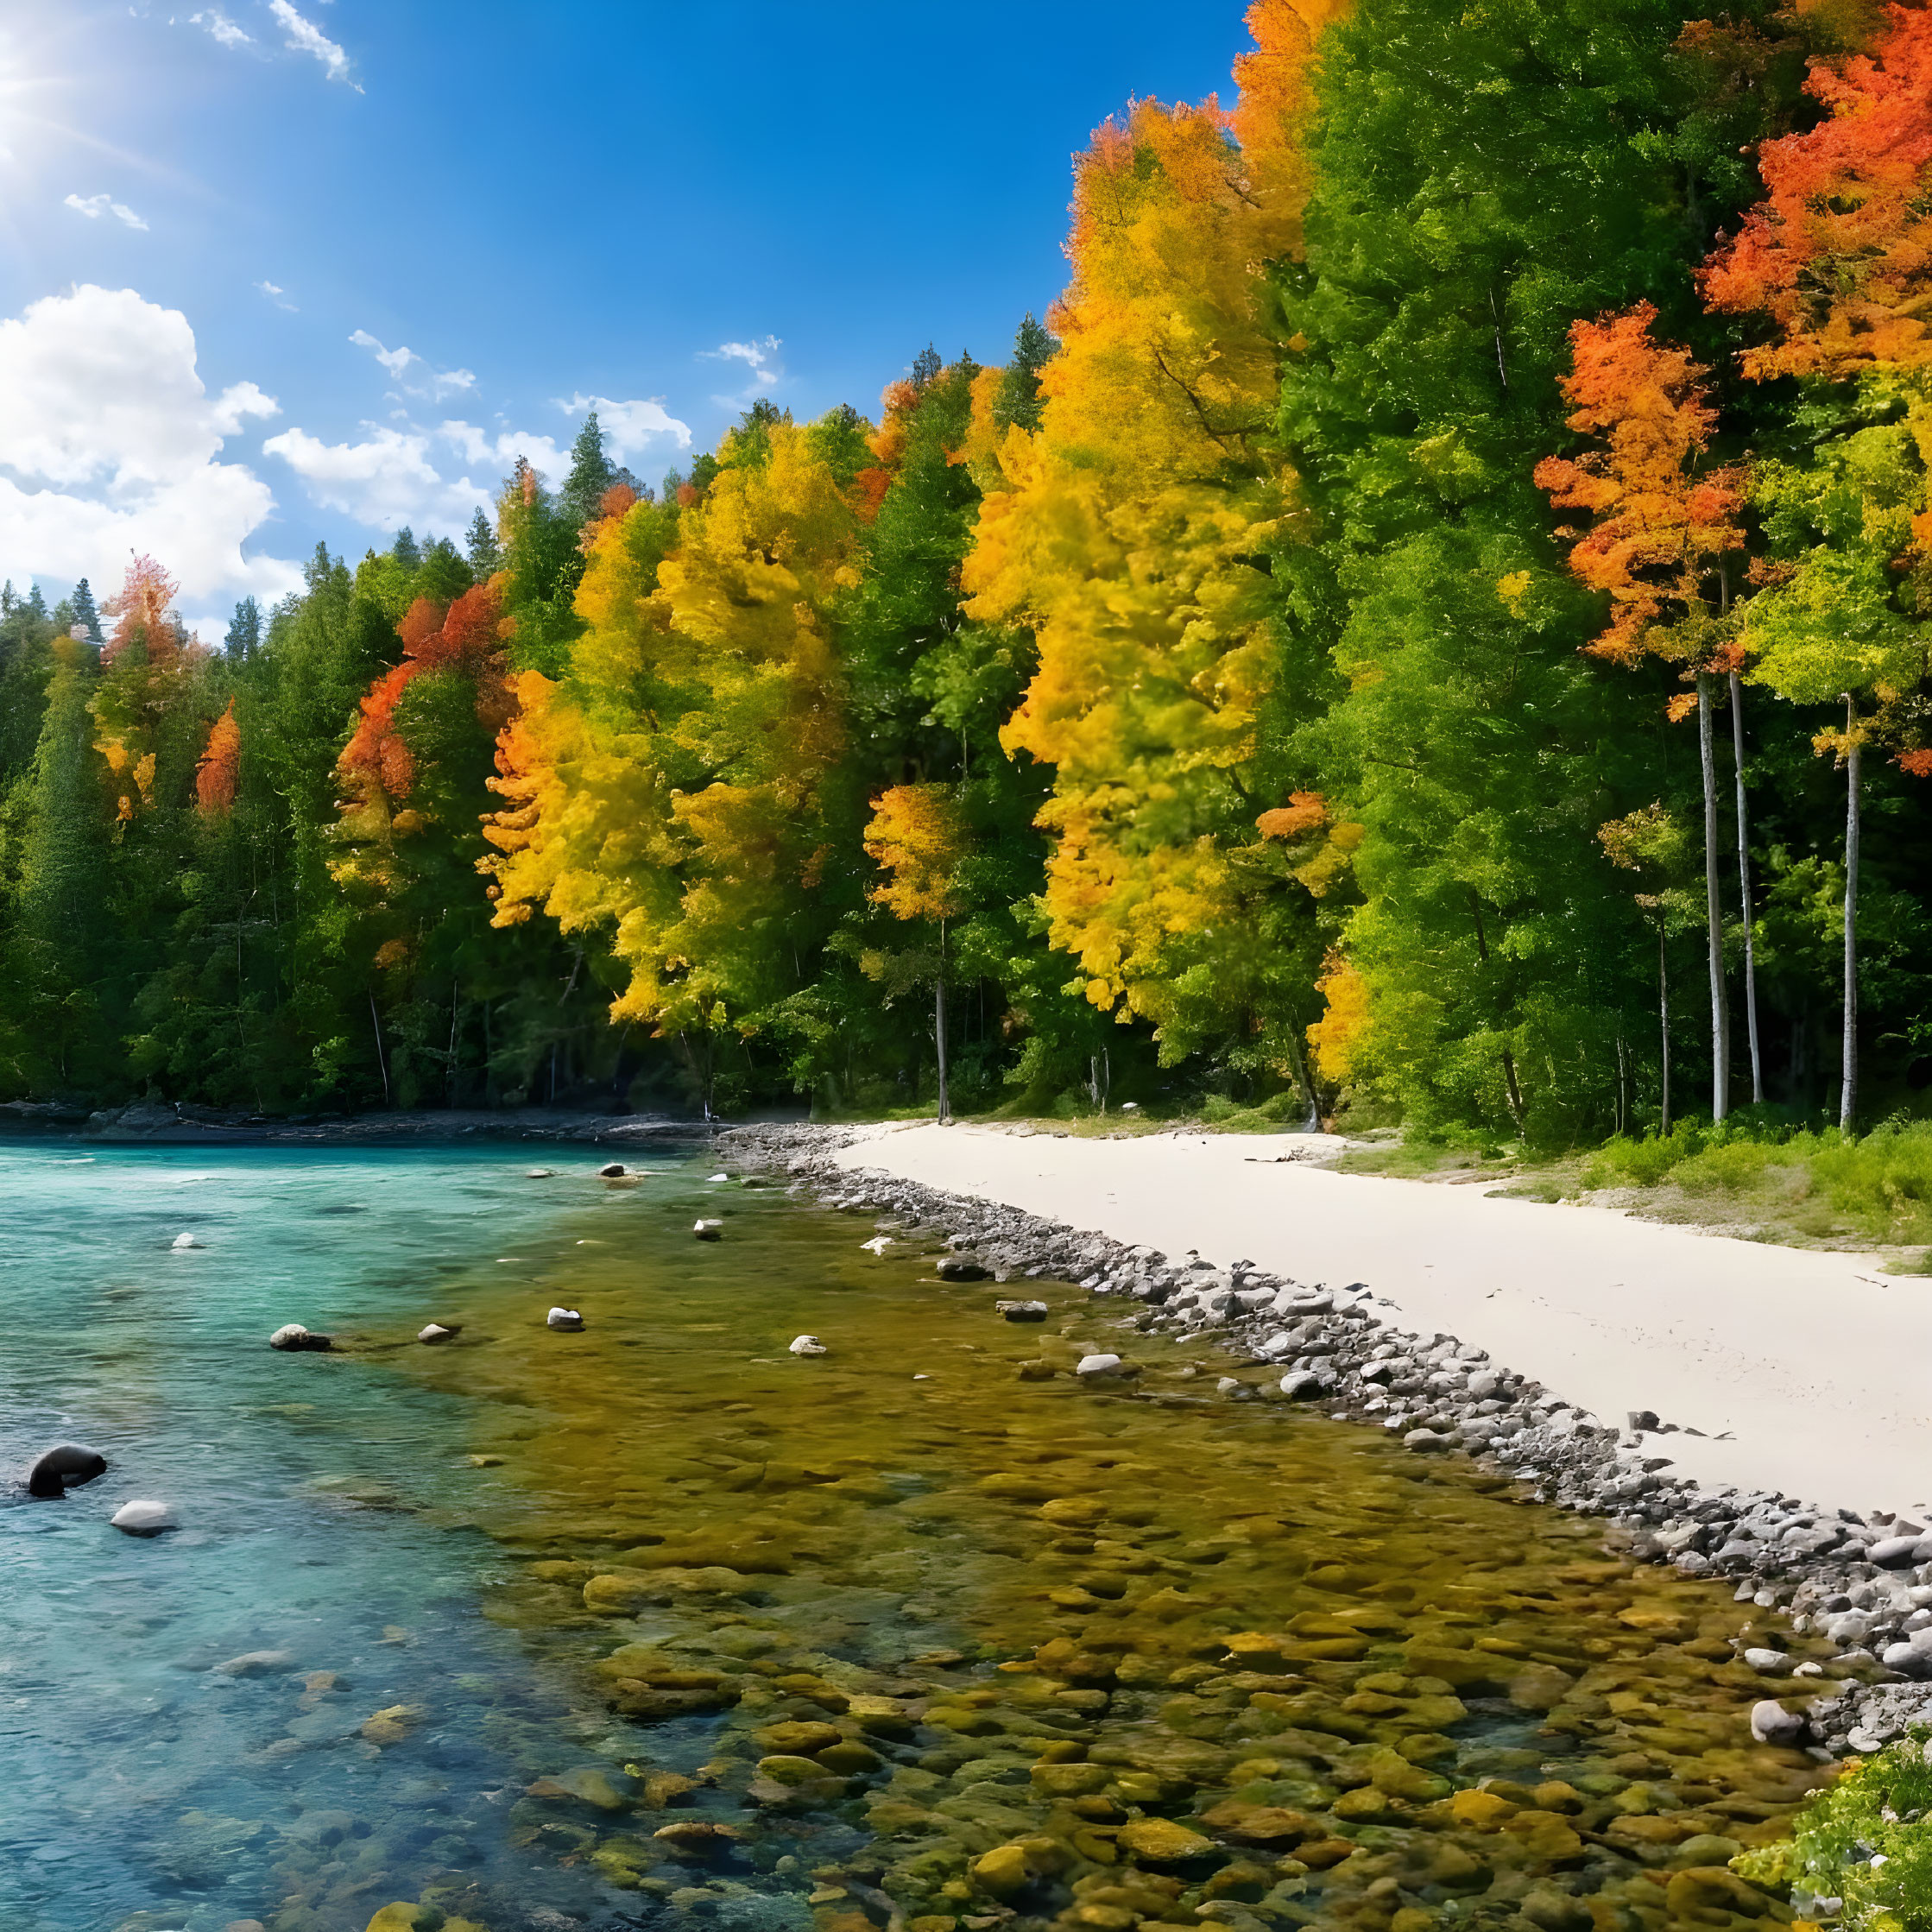 Scenic riverbank with clear waters, autumn trees, and blue sky